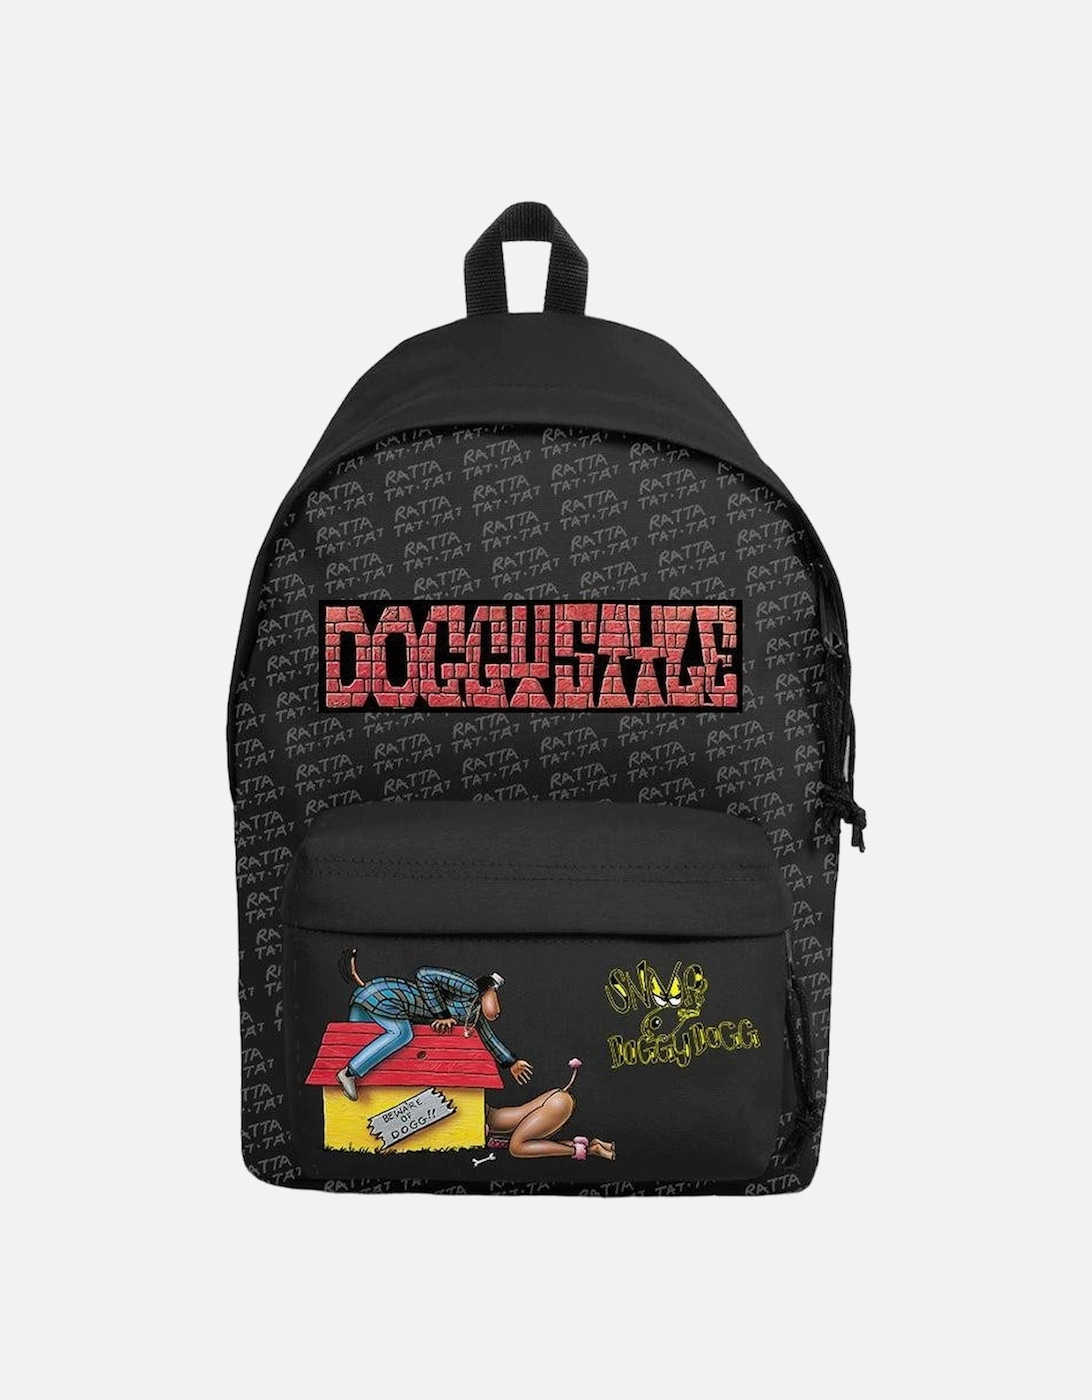 Doggystyle Death Row Records Backpack, 2 of 1